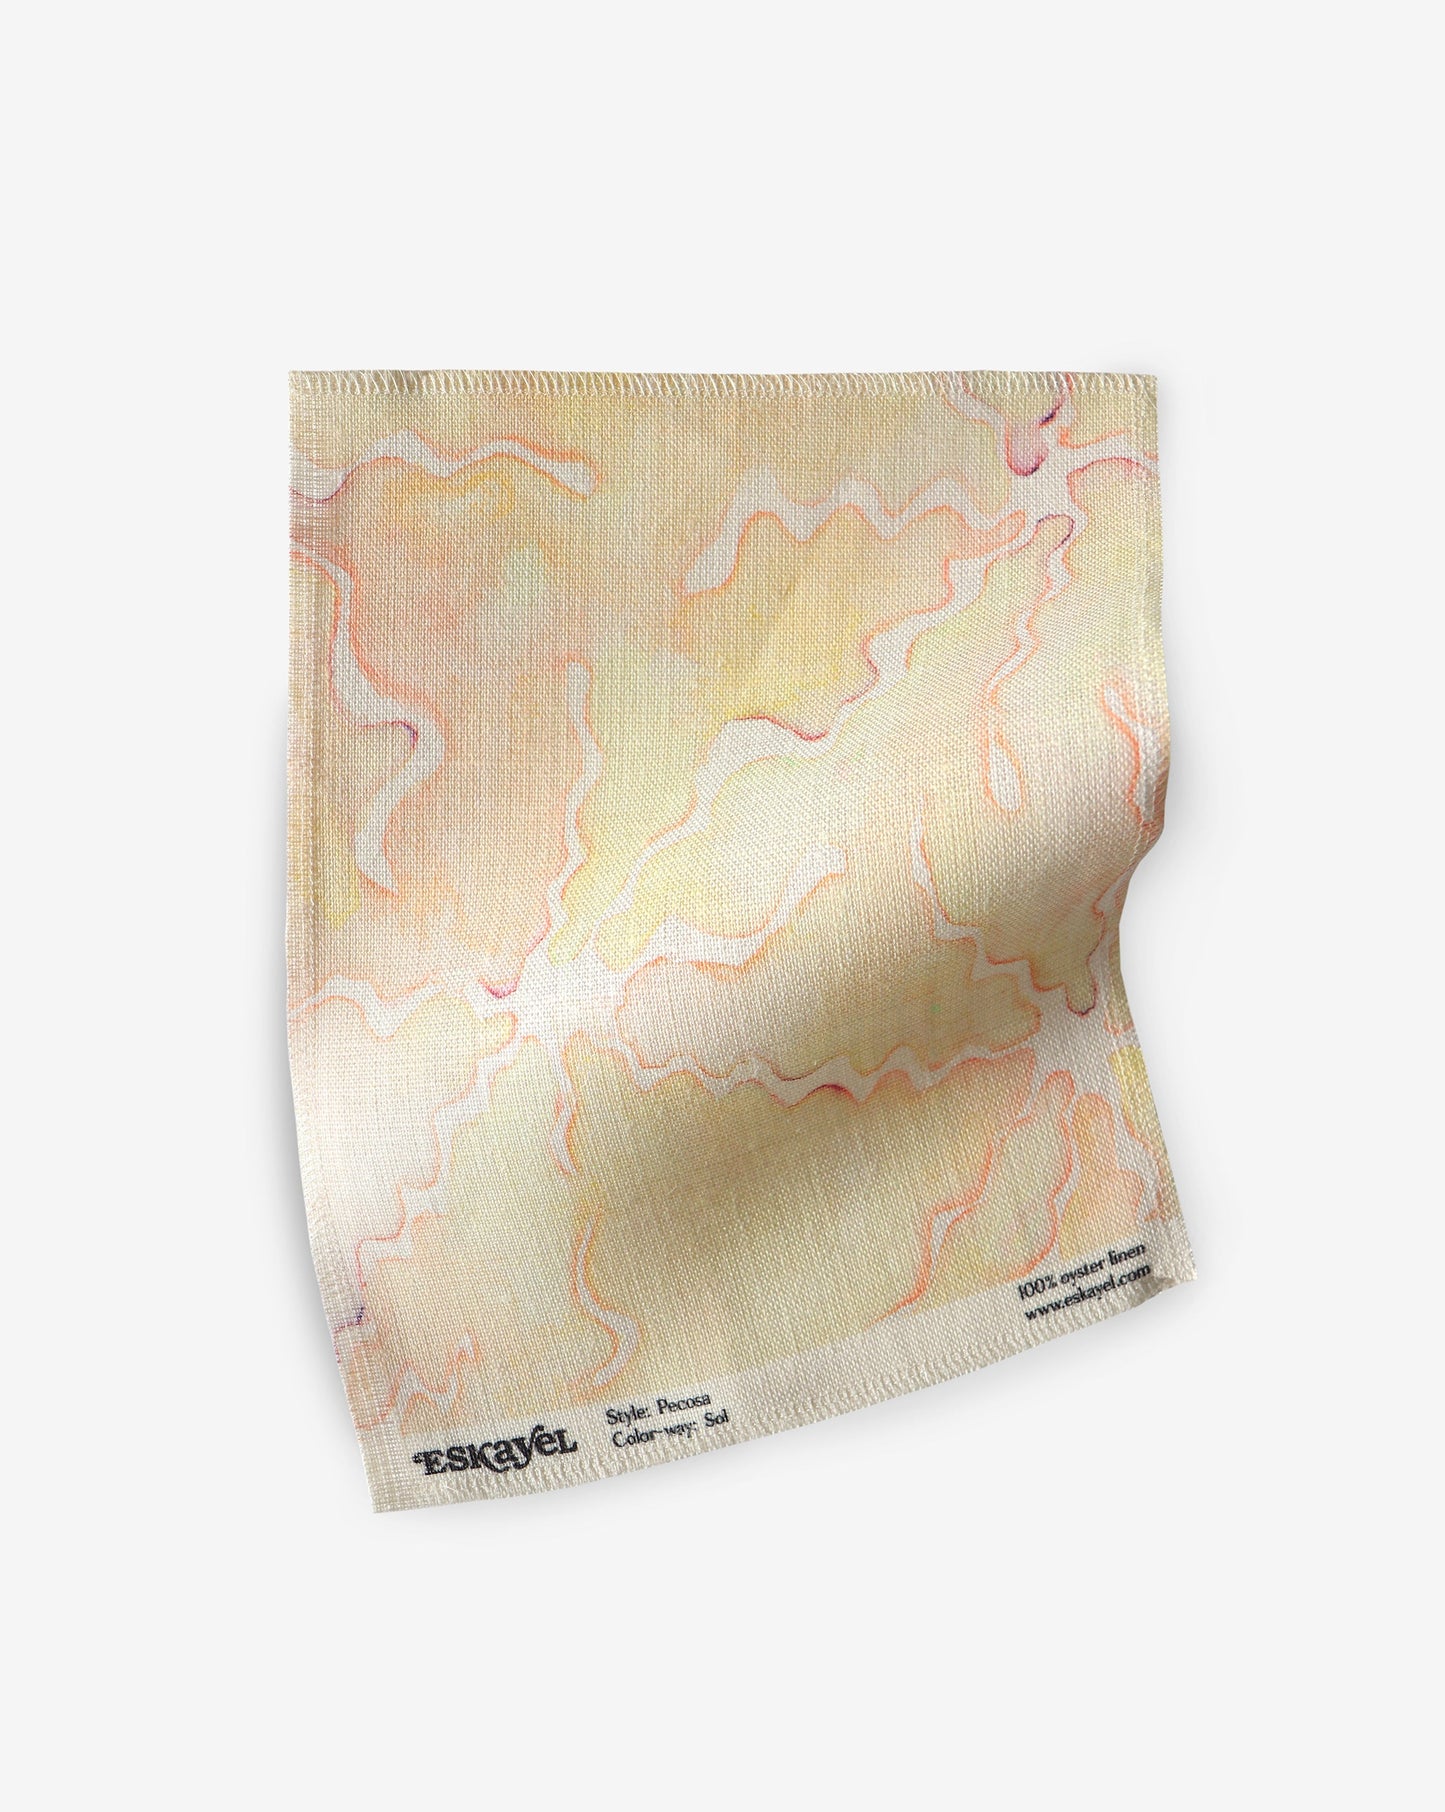 A piece of fabric with the Pecosa Fabric Sol design on it